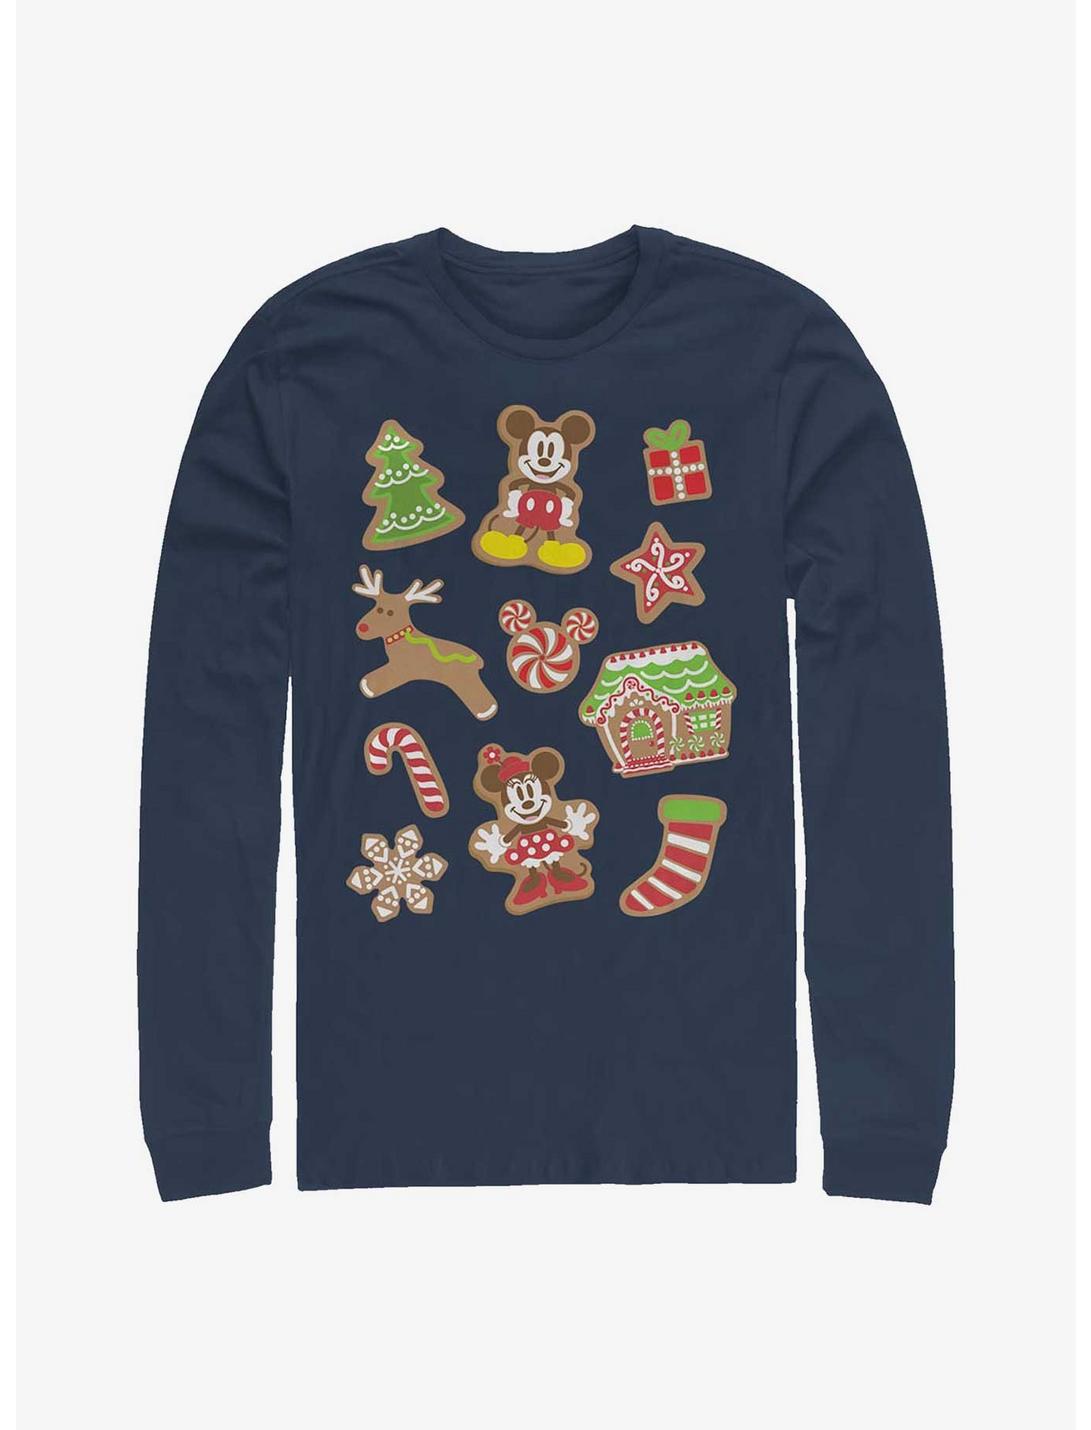 Disney Mickey Mouse & Minnie Mouse Holiday Gingerbread Cookies Long-Sleeve T-Shirt, NAVY, hi-res